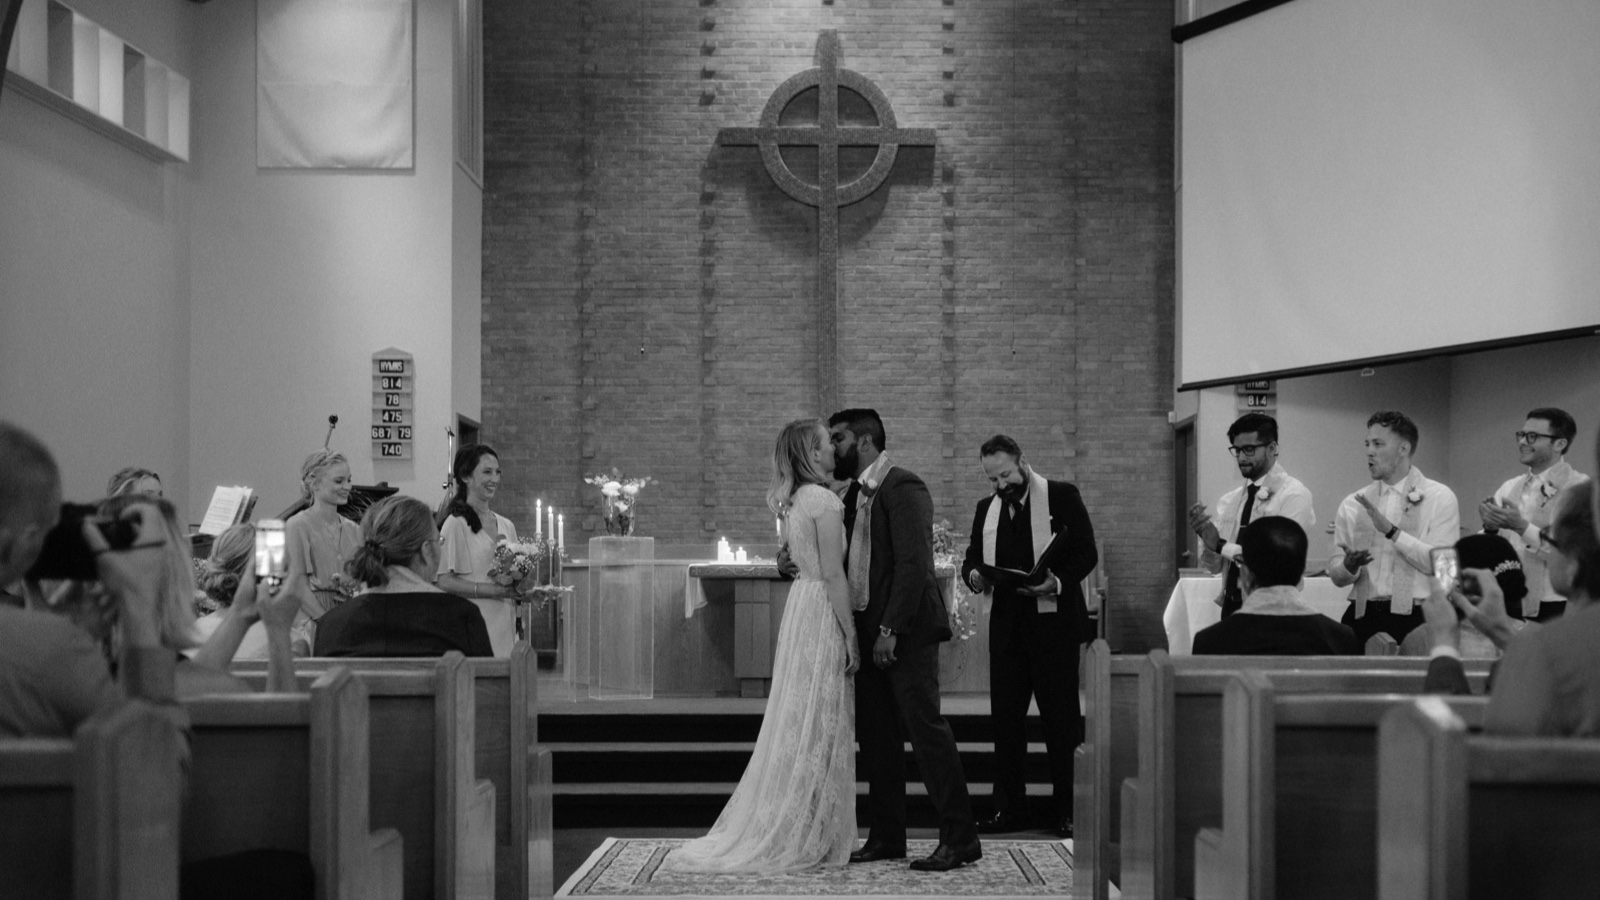 Intimate ceremony first kiss in Presbyterian church in calgary